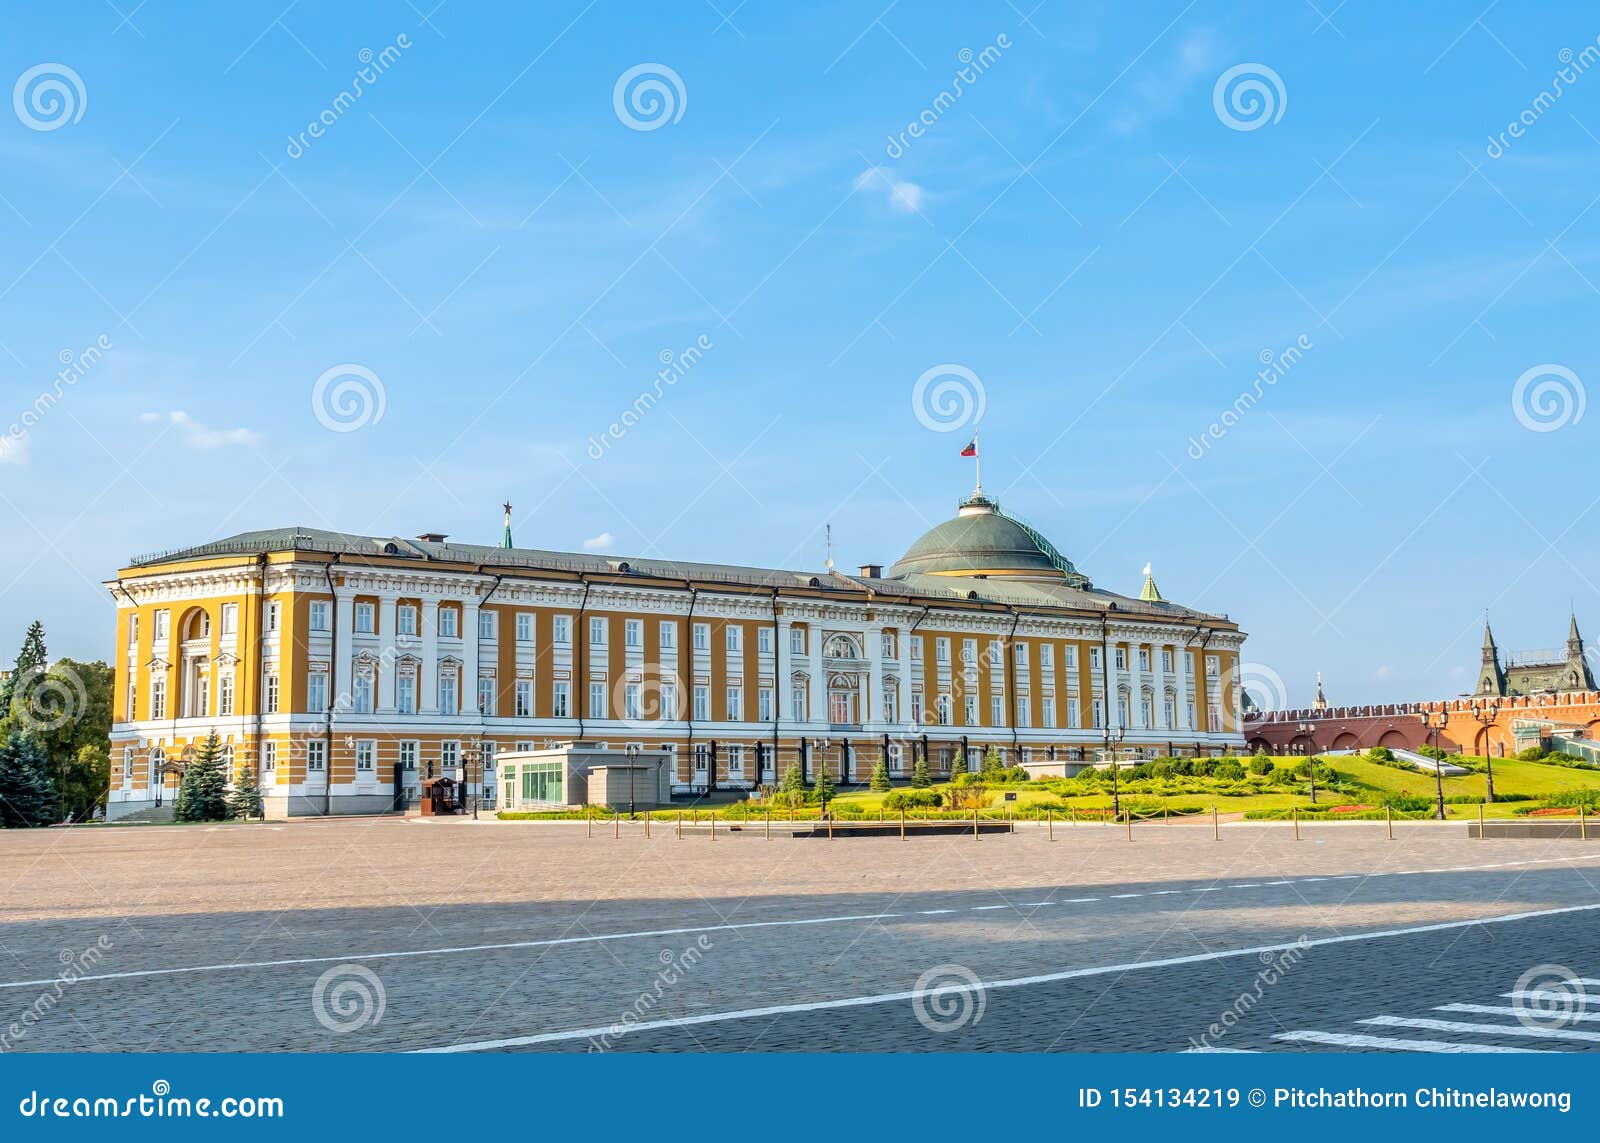 Kremlin Senate Building In Moscow Russia Editorial Stock Image Image Of Soviet Government